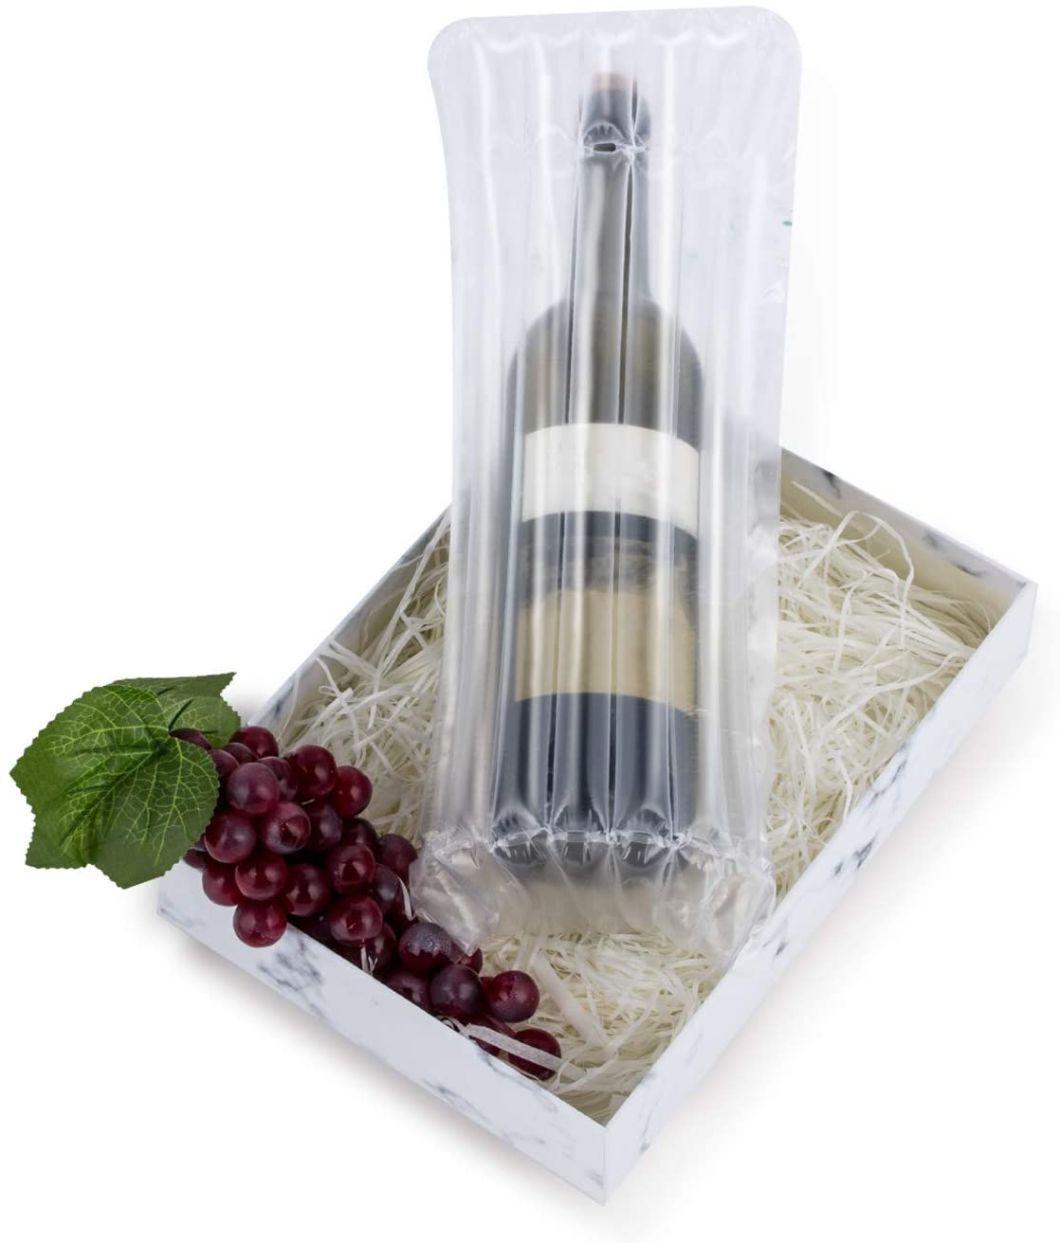 Wine Bottle Protector Bags - Inflatable Air Column Cushioning Sleeves Packaging Ensures Safe Transportation of Glass Bottles During Travel or Shipping with Free